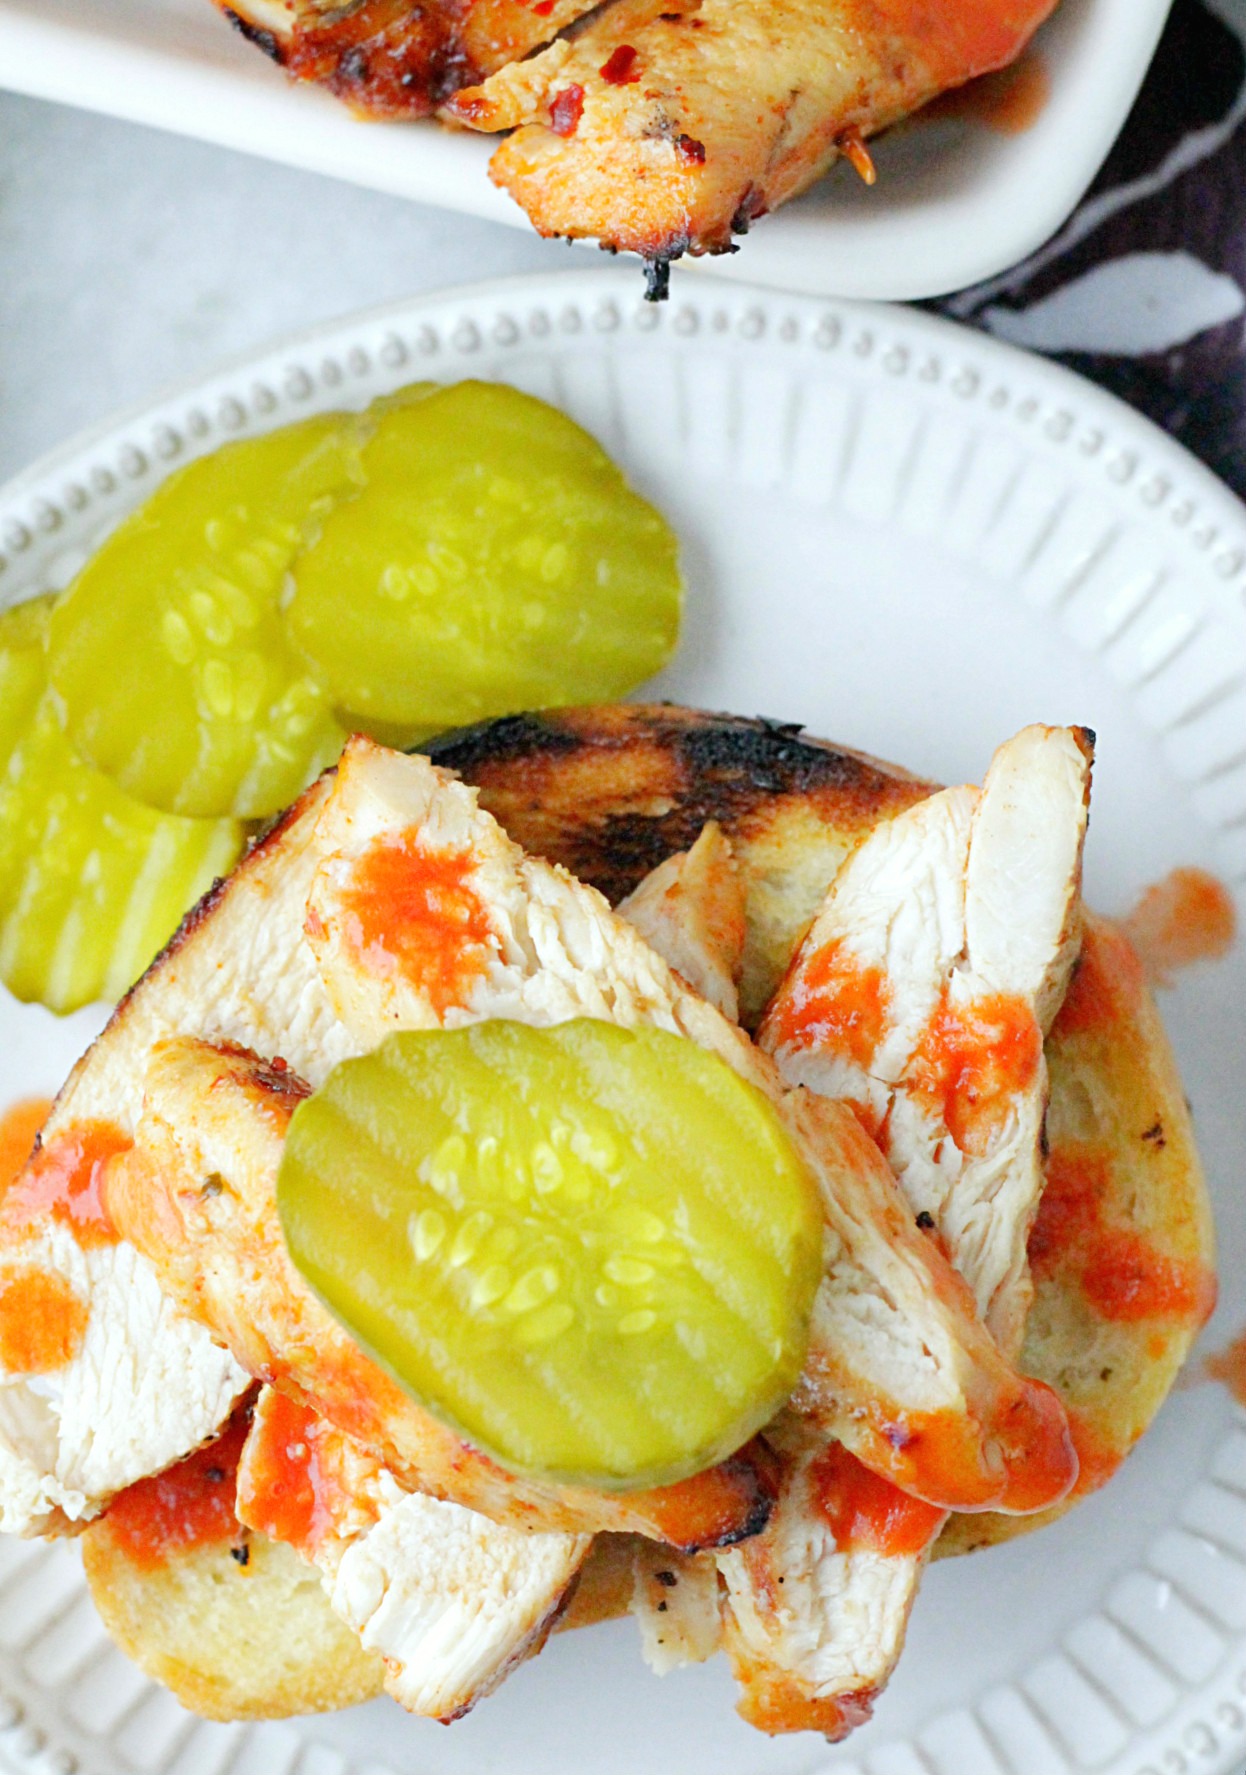 nashville hot grilled chicken on plate with pickles and garlic bread